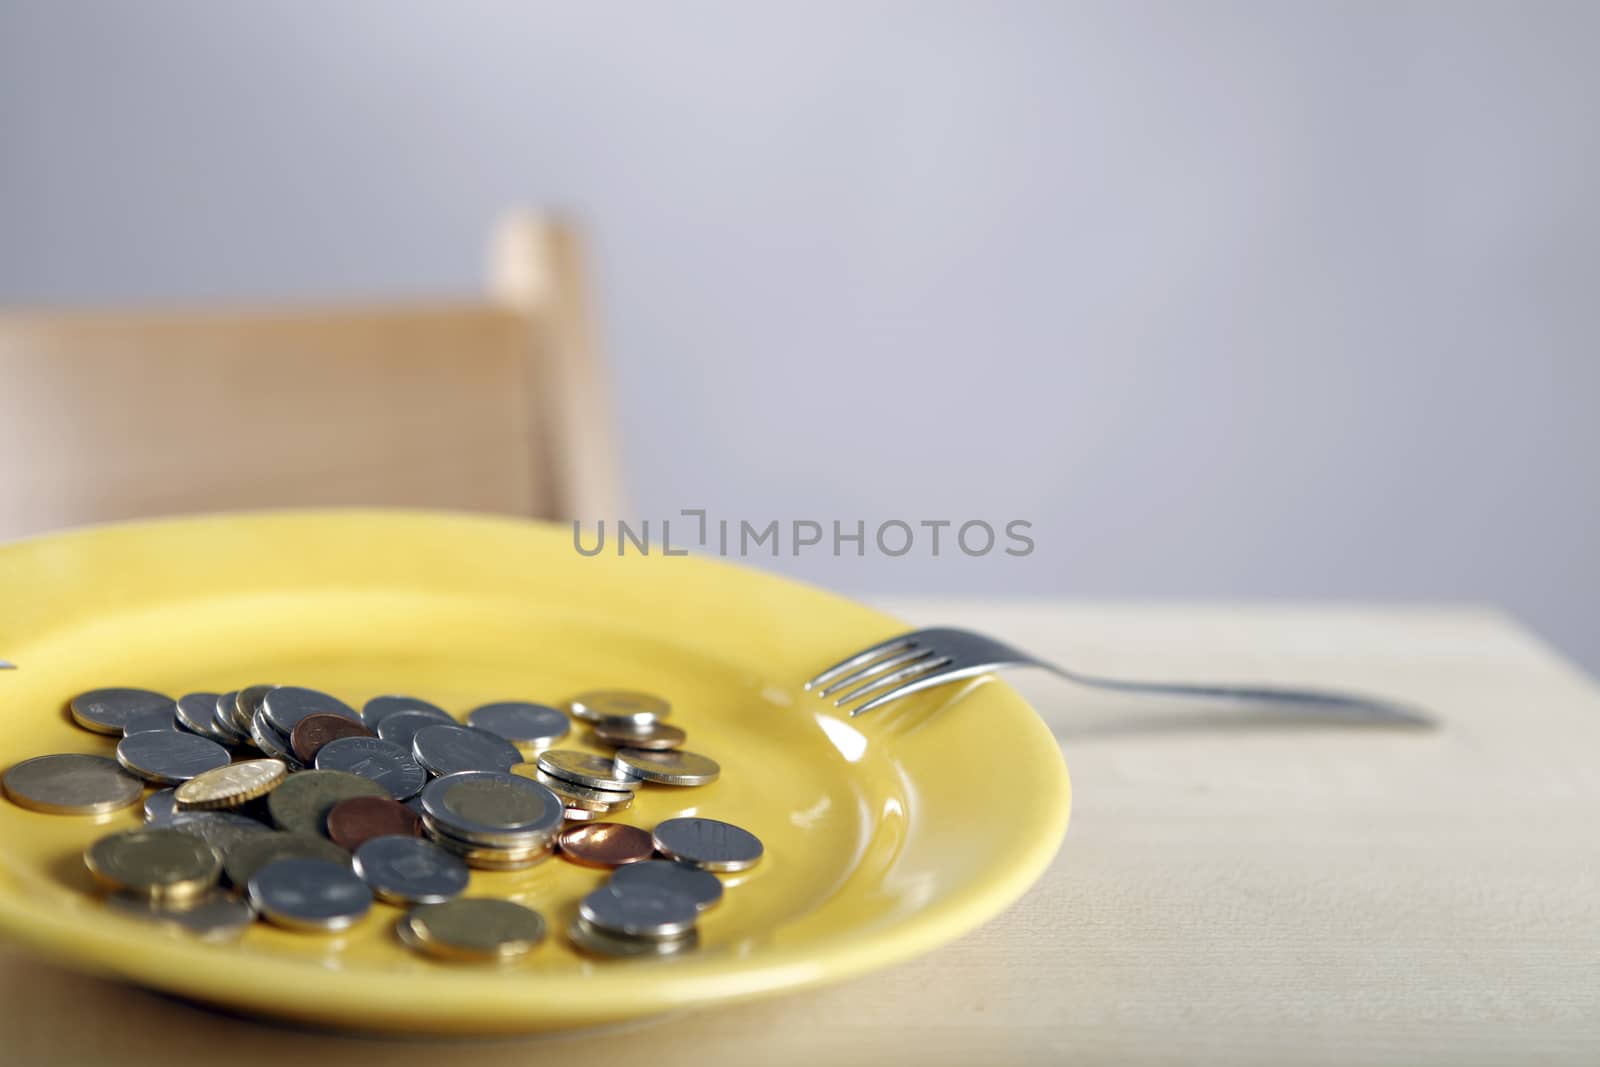 Many Euro coins in a yellow plate.